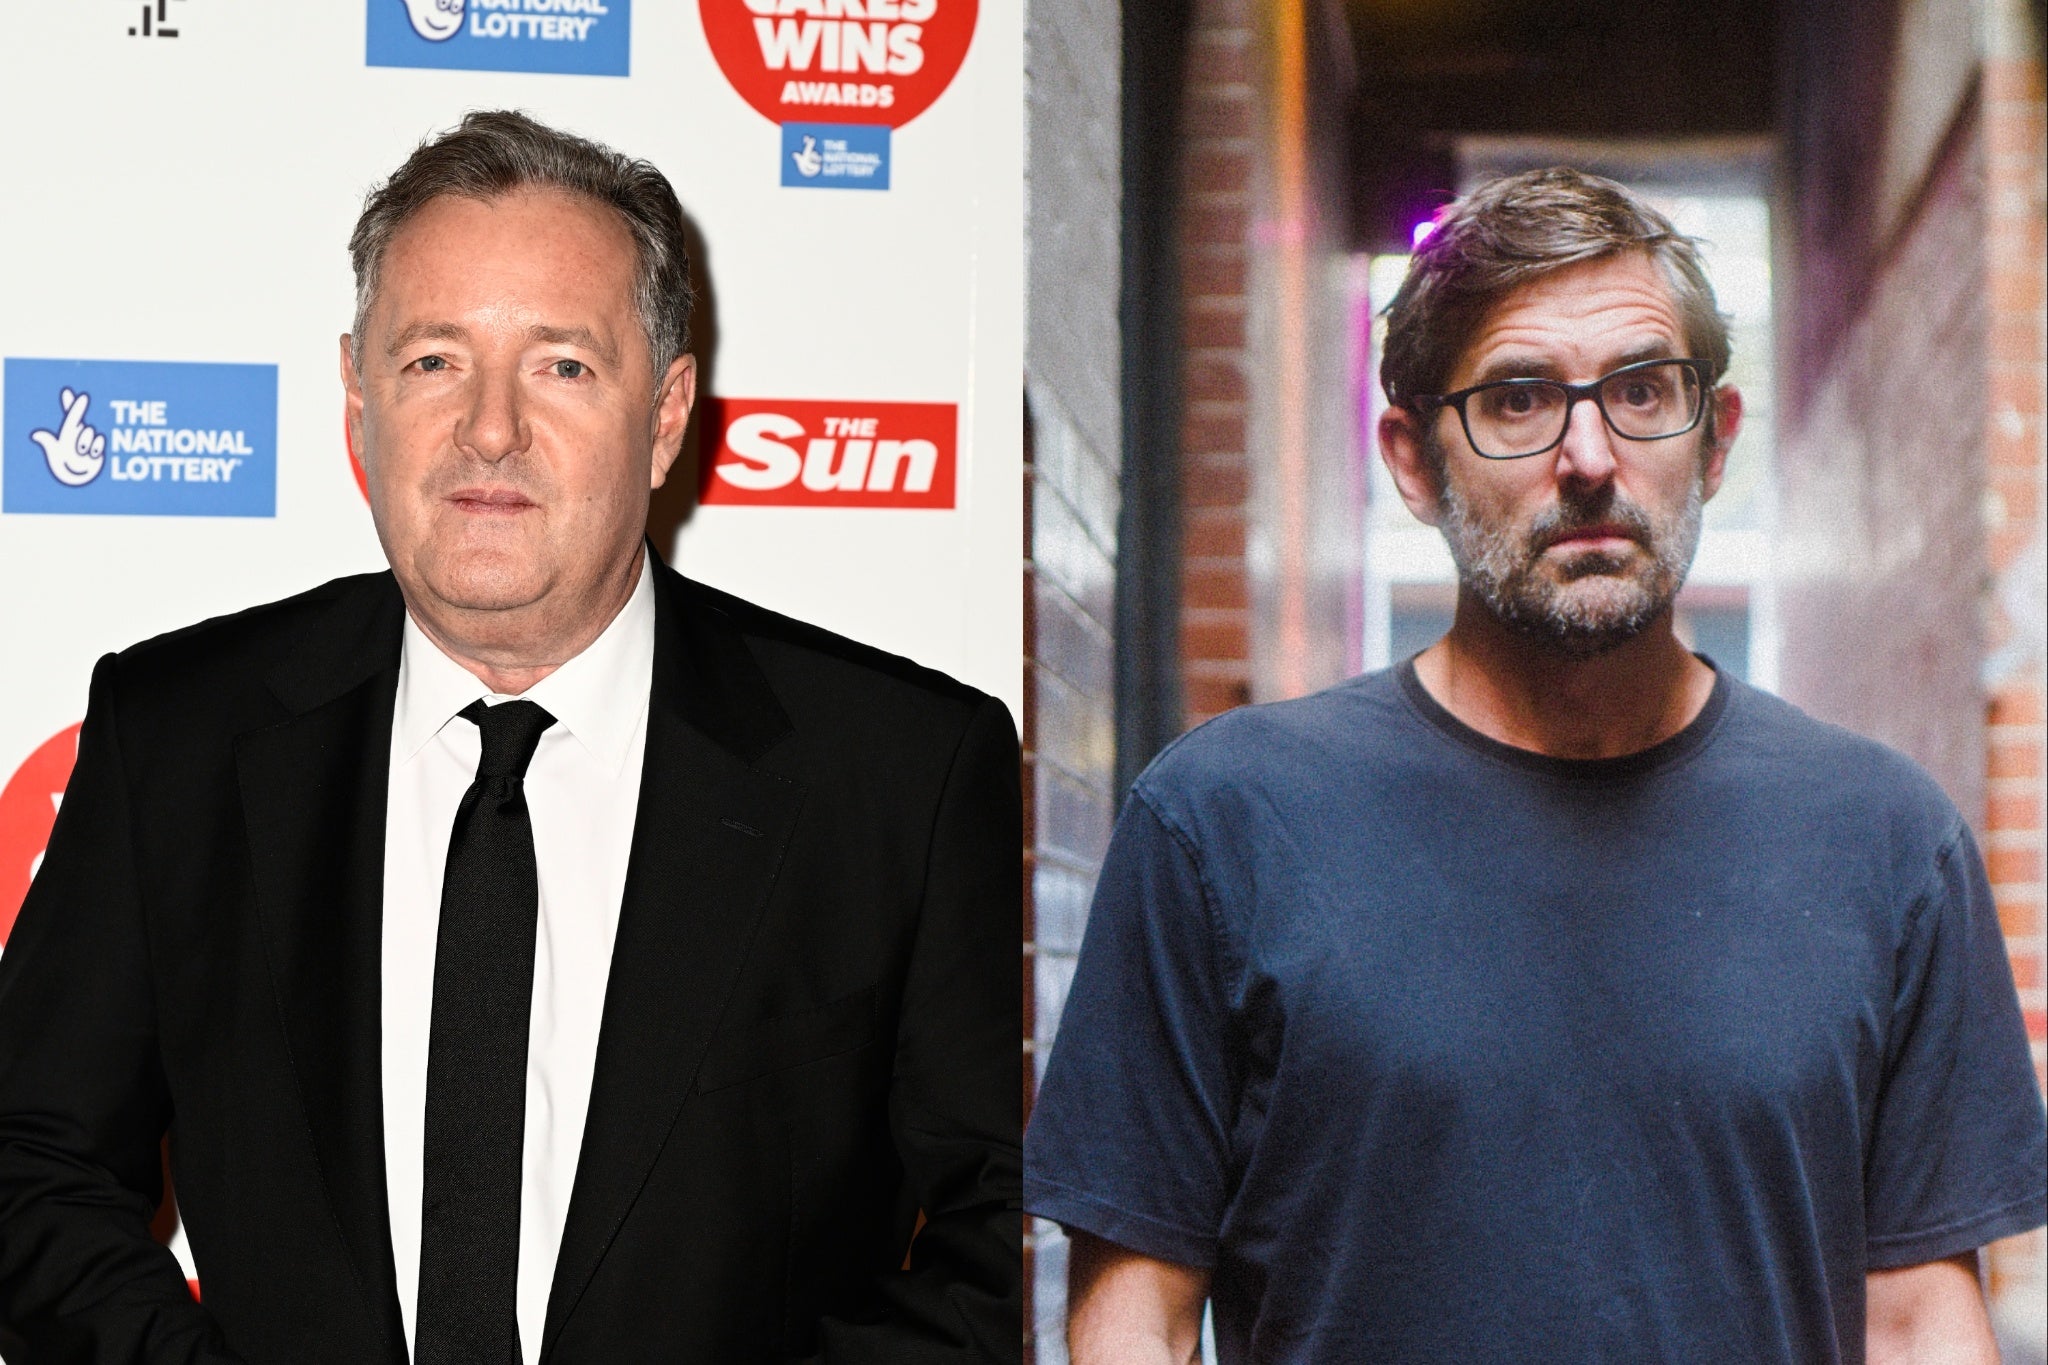 Piers Morgan and Louis Theroux